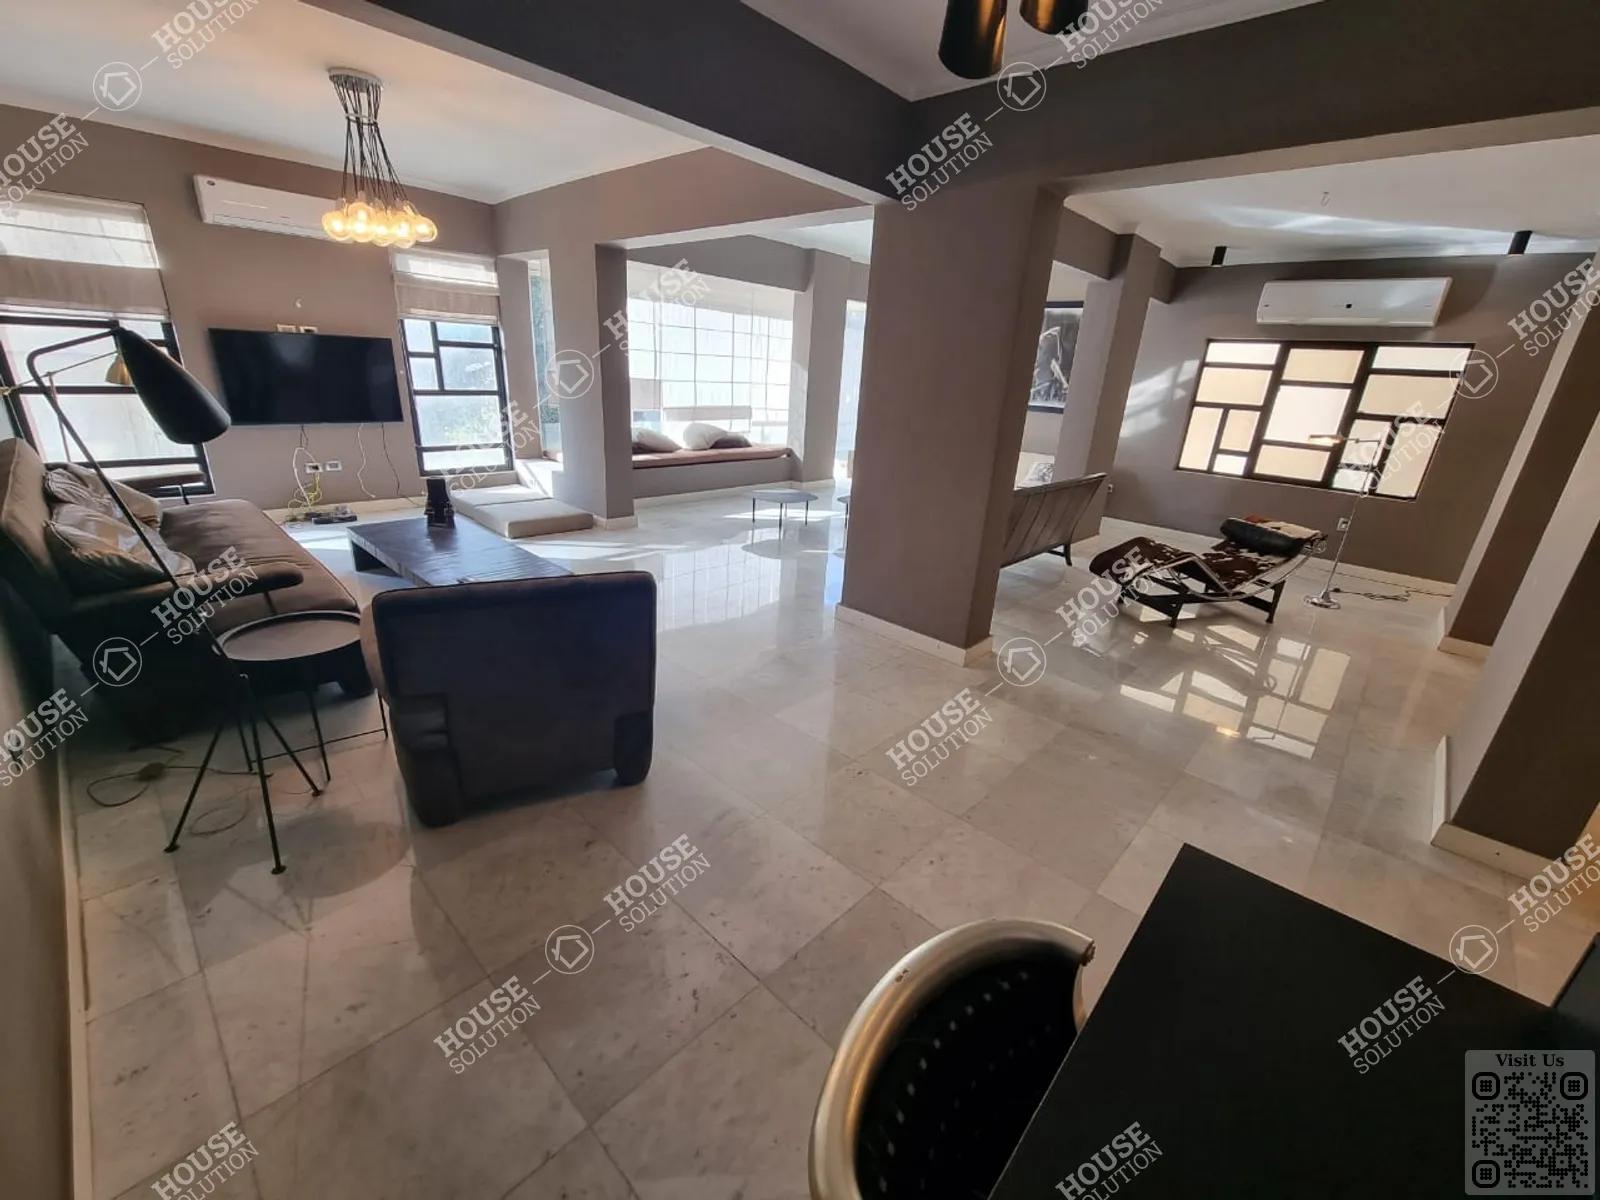 RECEPTION  @ Apartments For Rent In Maadi Maadi Degla Area: 180 m² consists of 3 Bedrooms 3 Bathrooms Modern furnished 5 stars #3428-1